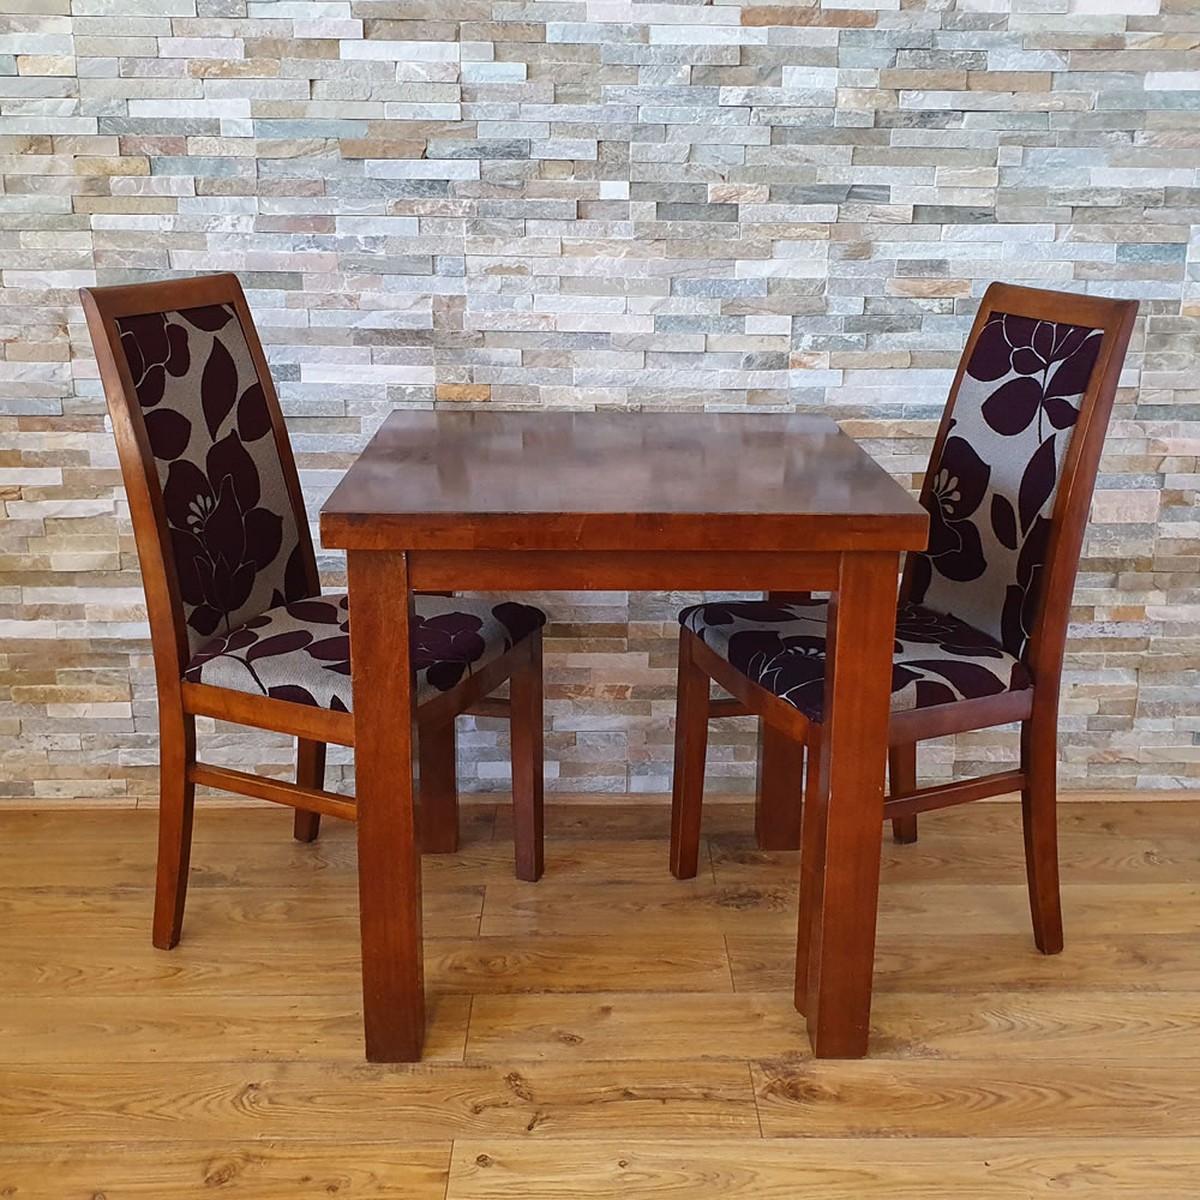 Secondhand Chairs and Tables | Restaurant Chairs | 24x Used Solid Wood